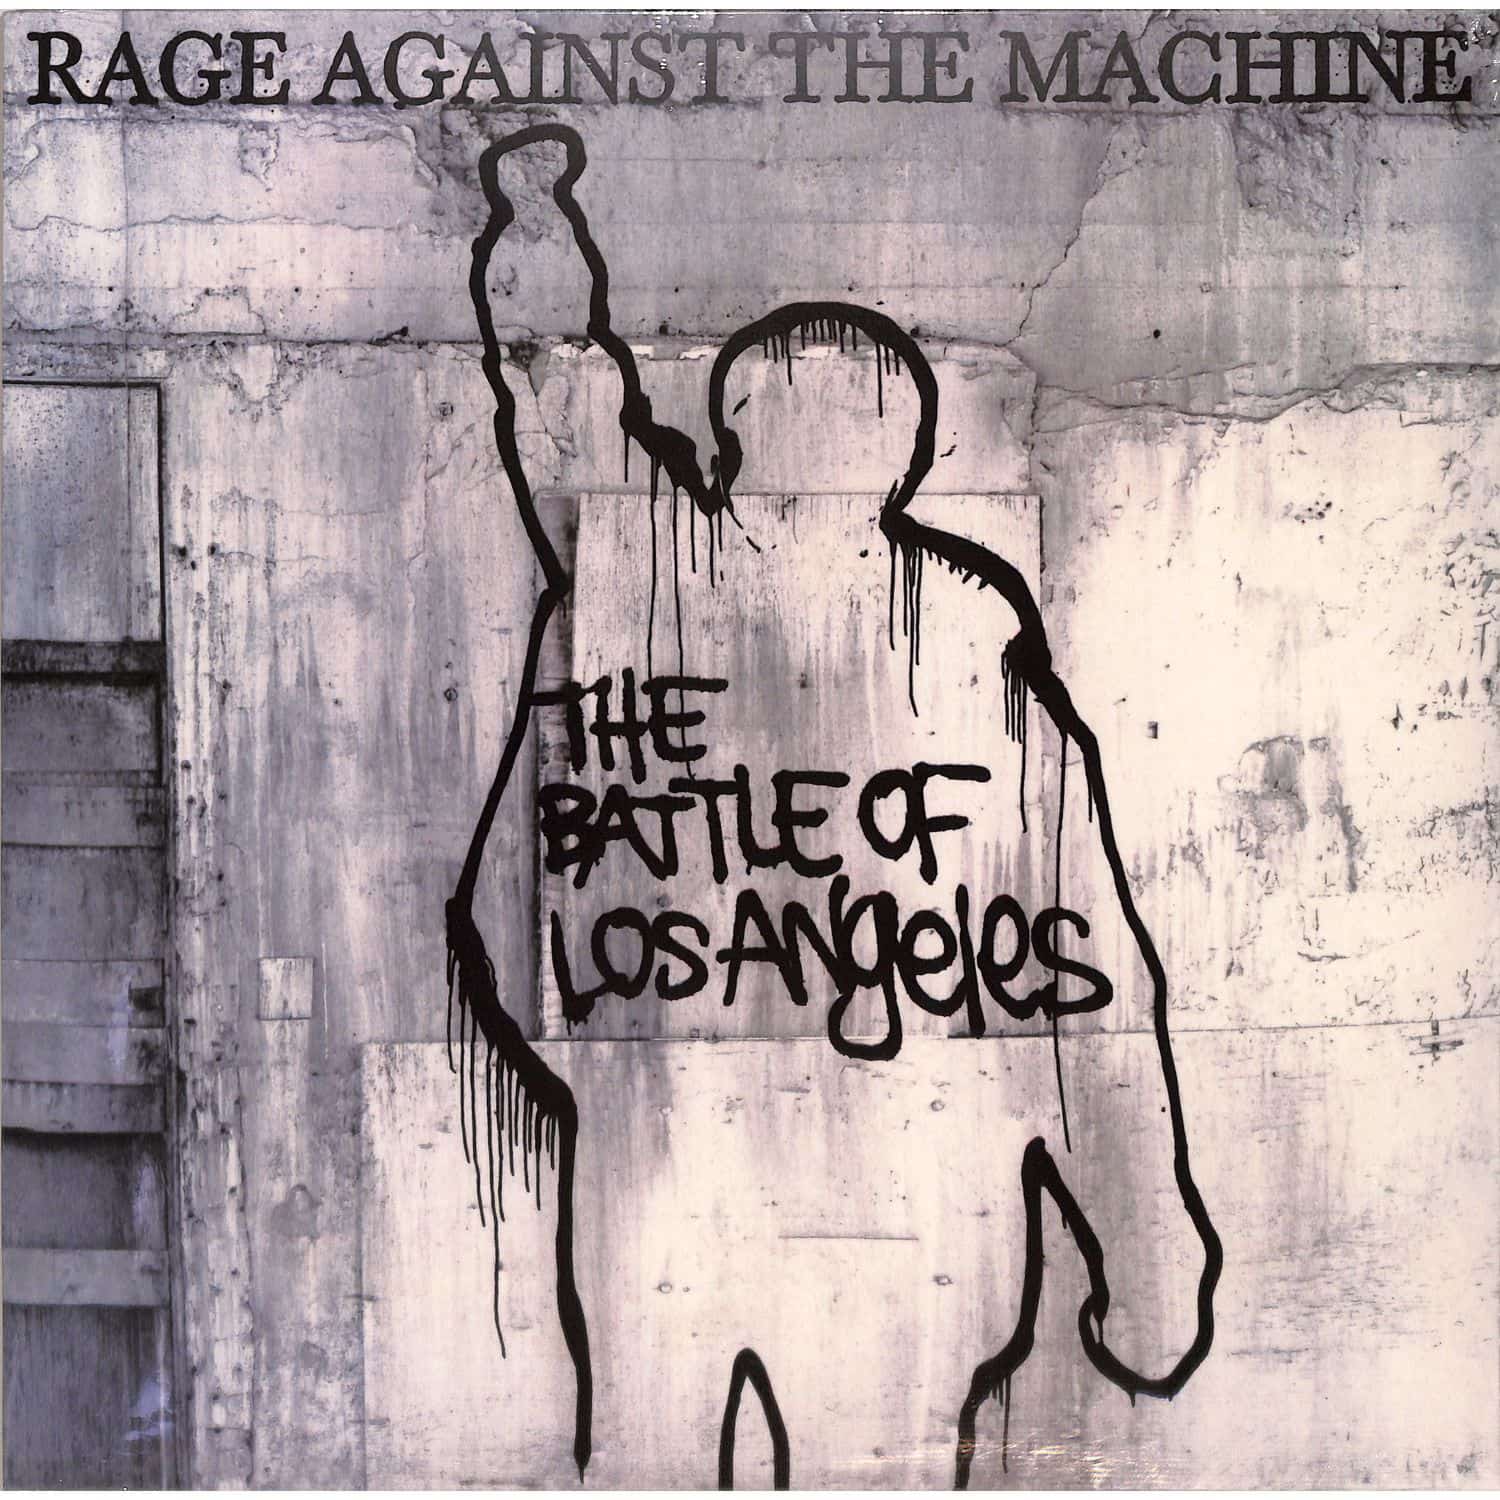 Rage Against The Machine - THE BATTLE OF LOS ANGELES 